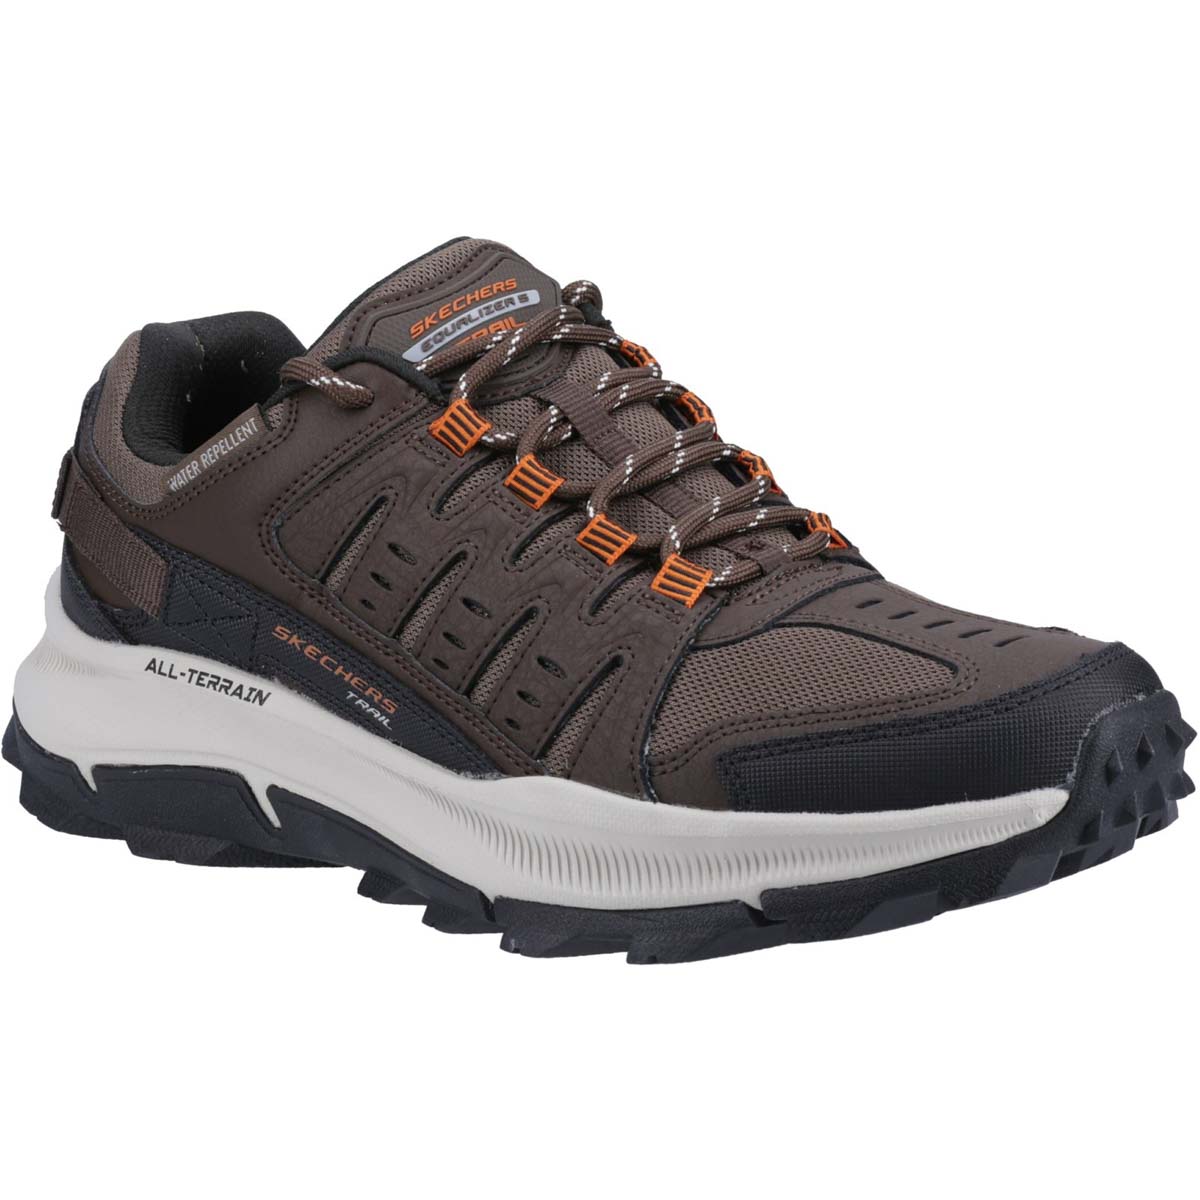 Skechers Equalizer 5.0 Trail Solix BROR Brown Orange Mens comfort shoes in a Plain Leather and Textile in Size 6